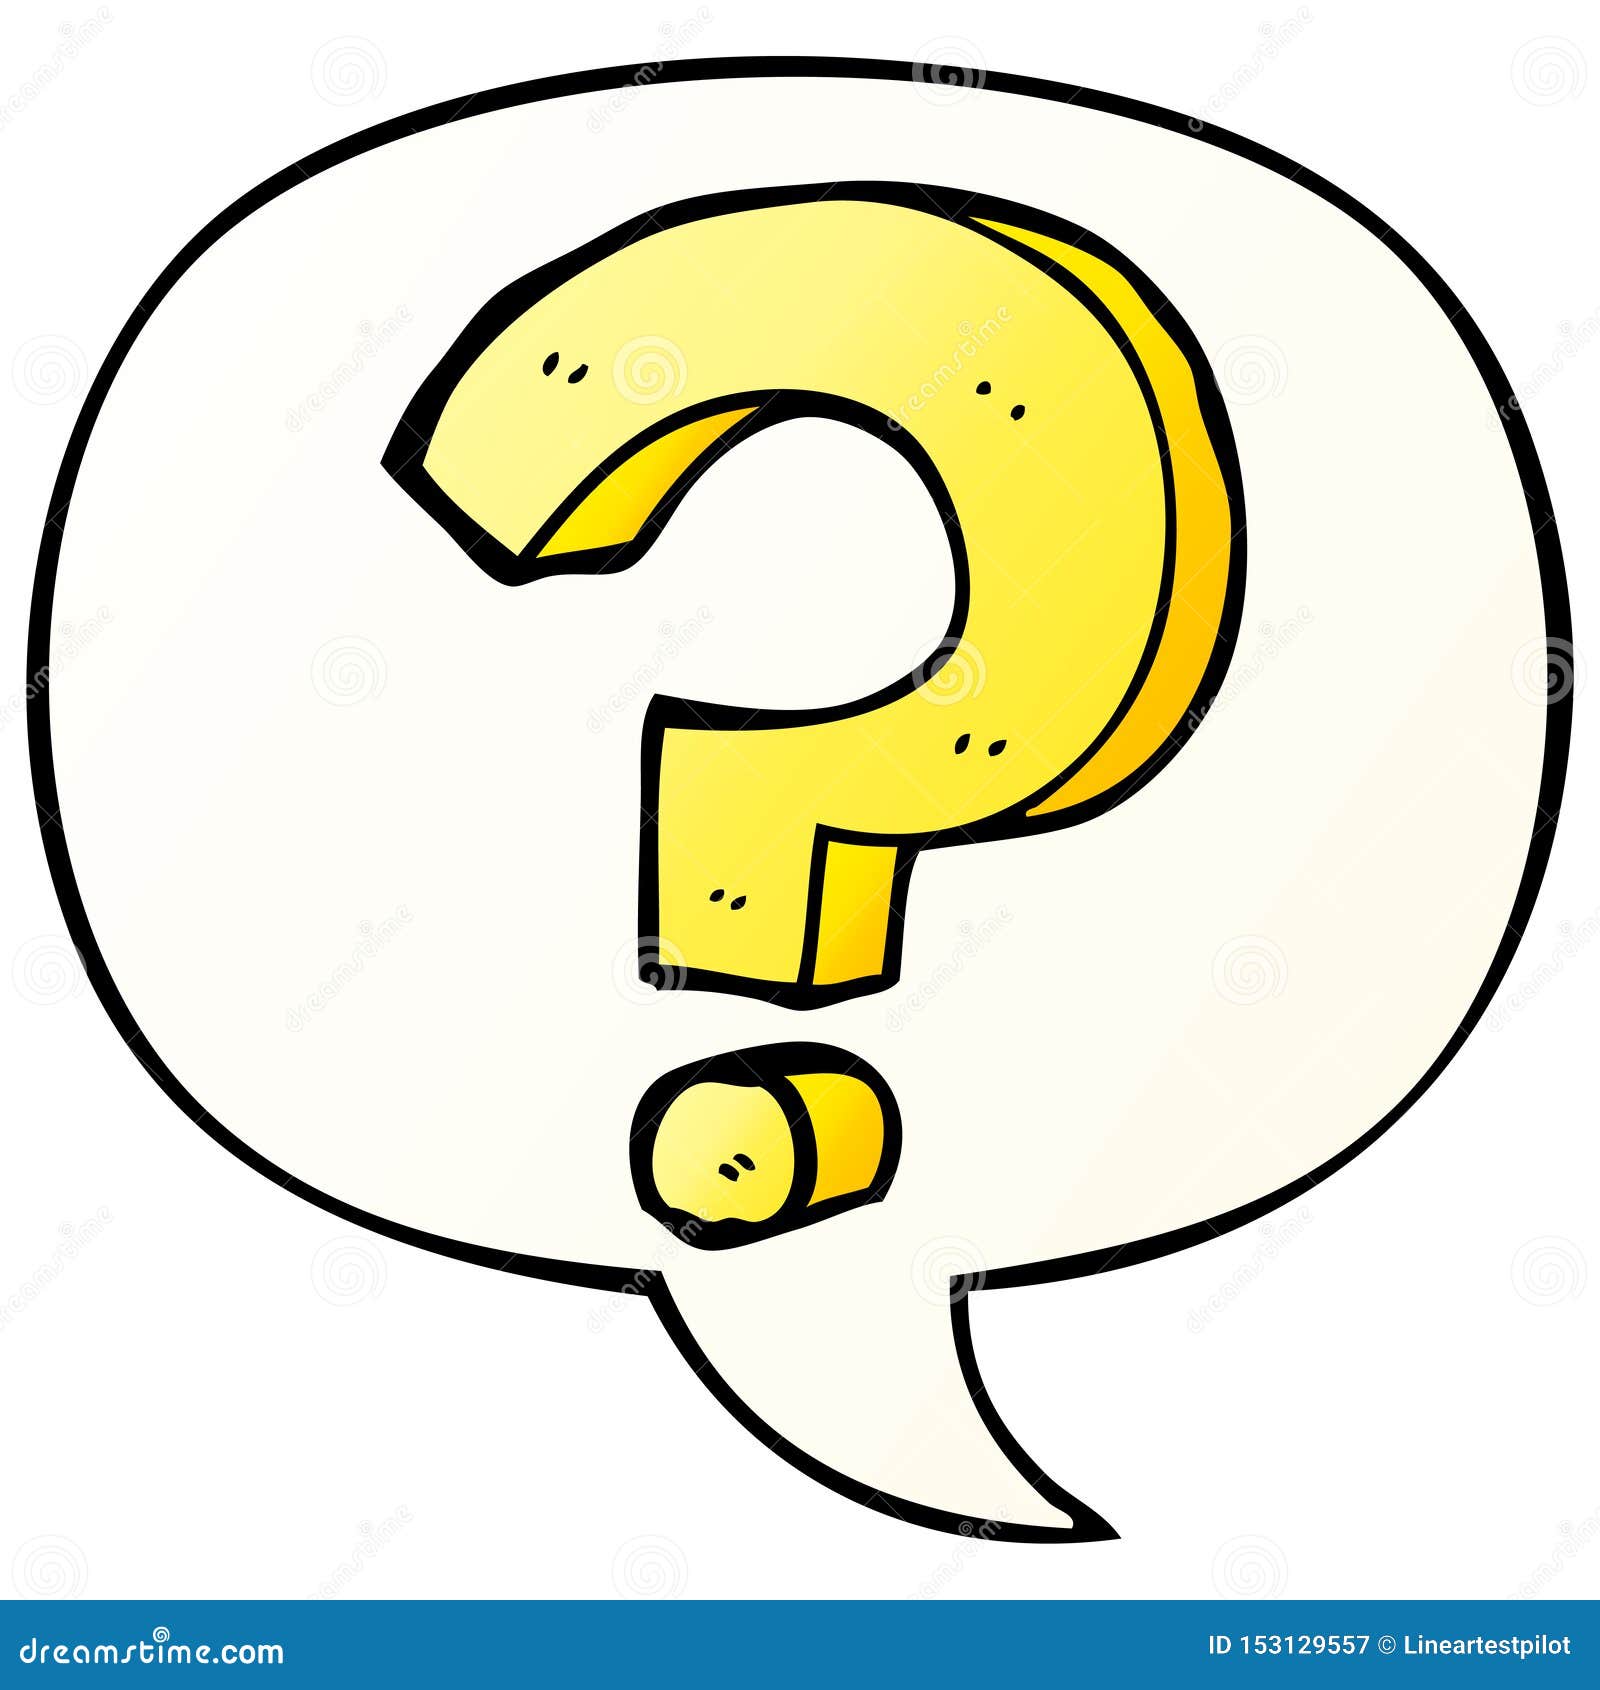 A Creative Cartoon Question Mark And Speech Bubble In Smooth Gradient Style Stock Vector